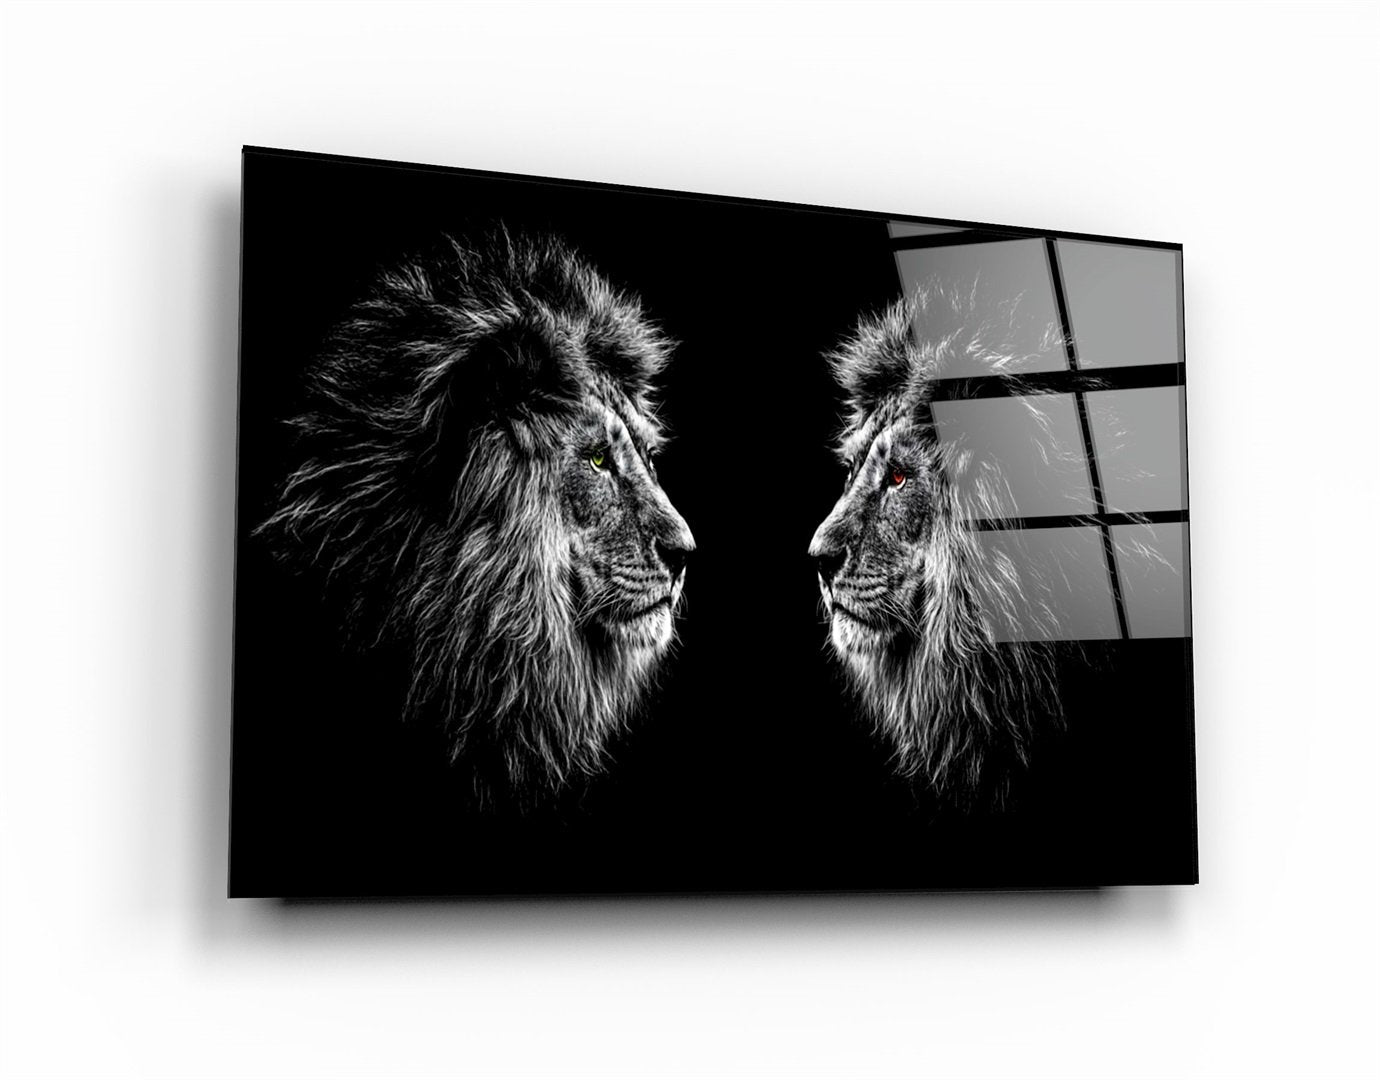 ・"Lions Confrontation BW "・Glass Wall Art